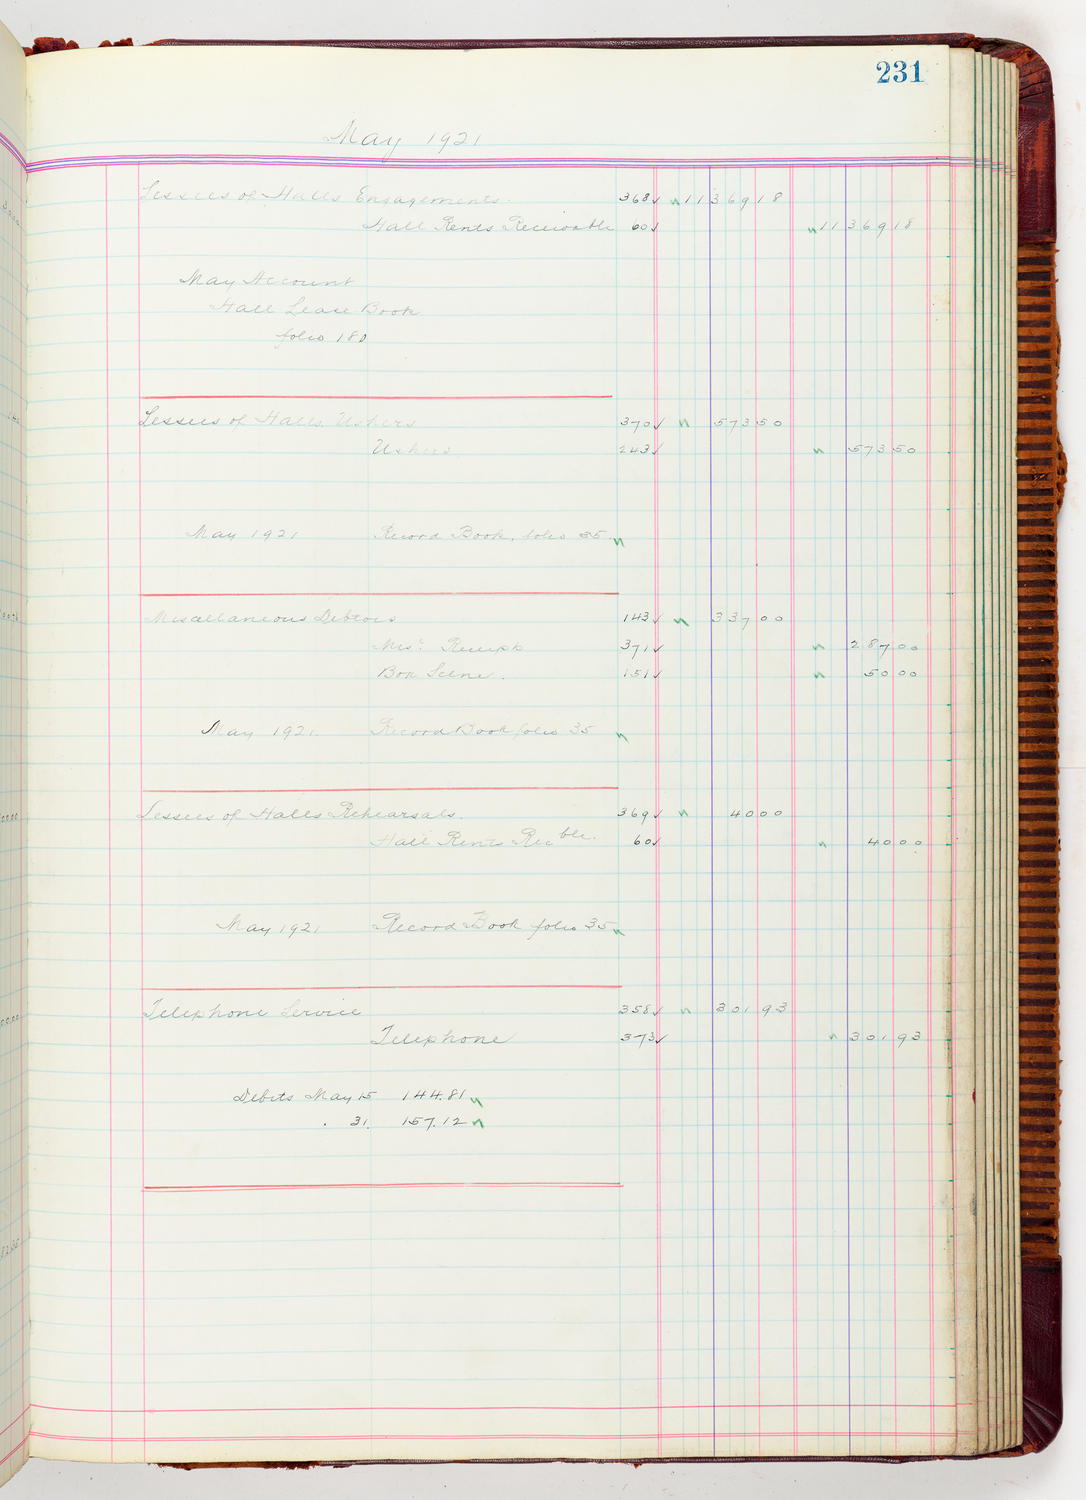 Music Hall Accounting Ledger, volume 5, page 231